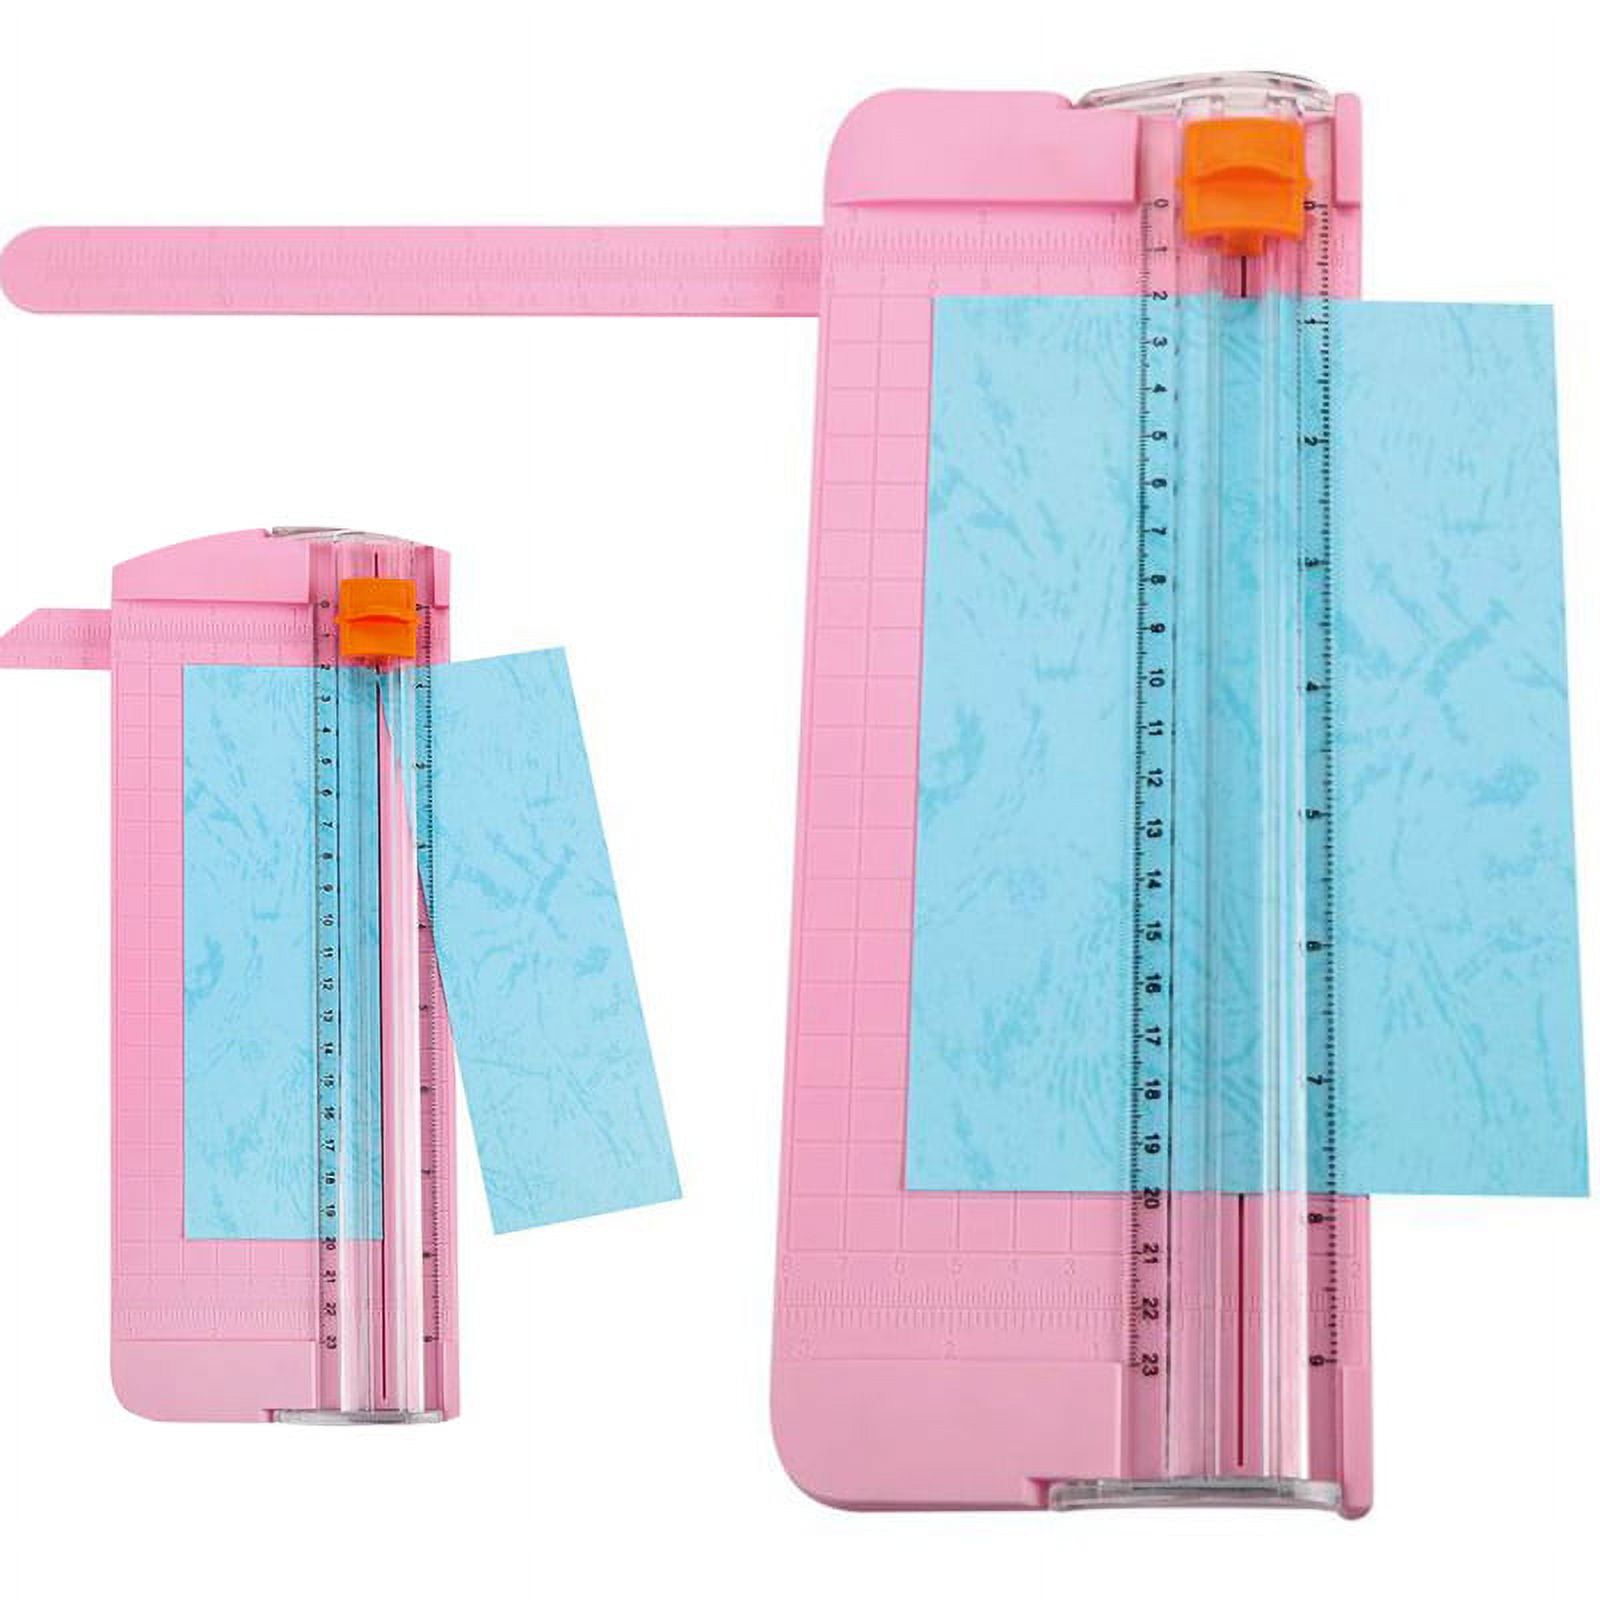 A4 Paper Cutter Mini Crafts DIY Non Slip Ruler Hand Tool Durable Photo Trimmer Lightweight for Office Home School Stationery Paper Photo Pink, Size